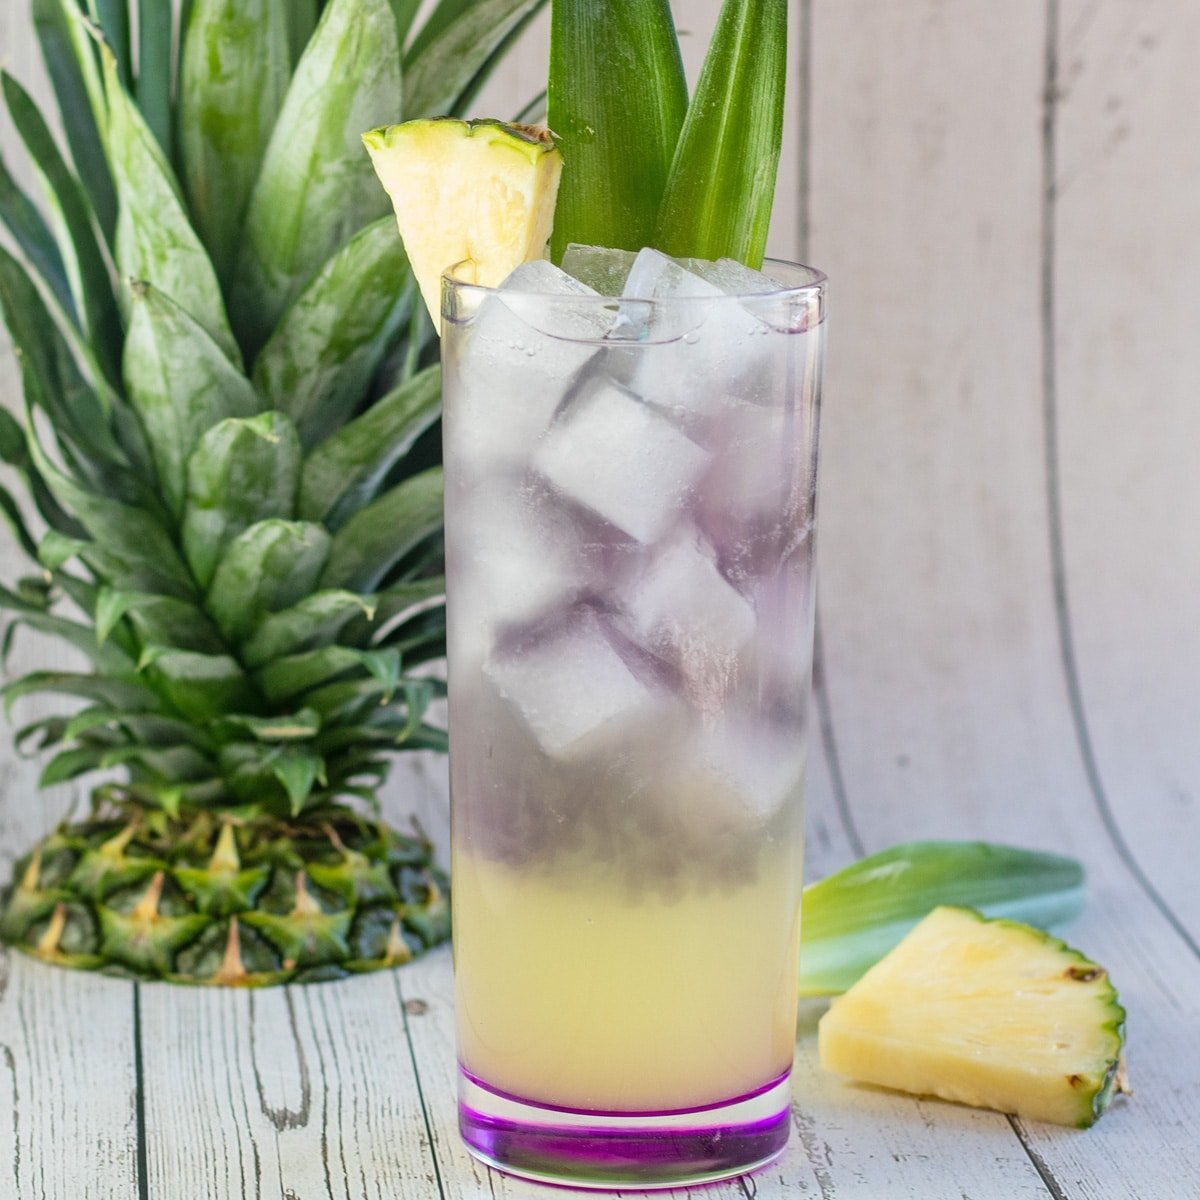 Royal Hawaiian cocktail garnished with pineapple wedge and leaves.